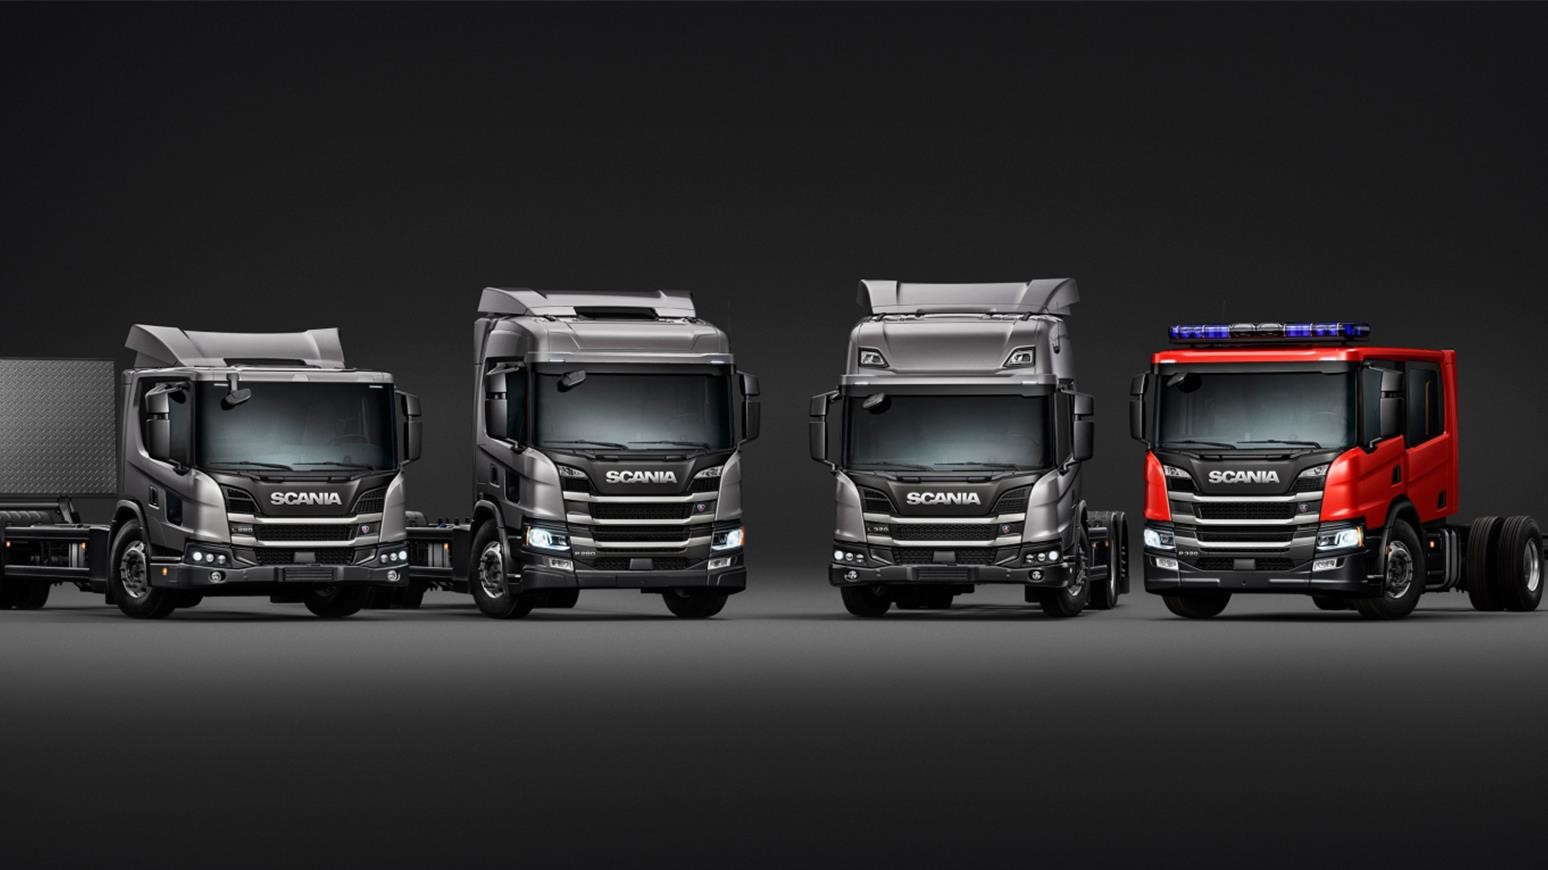 Scania Showing Two L-Series Trucks & One P-Series Model At Freight In The City 2019